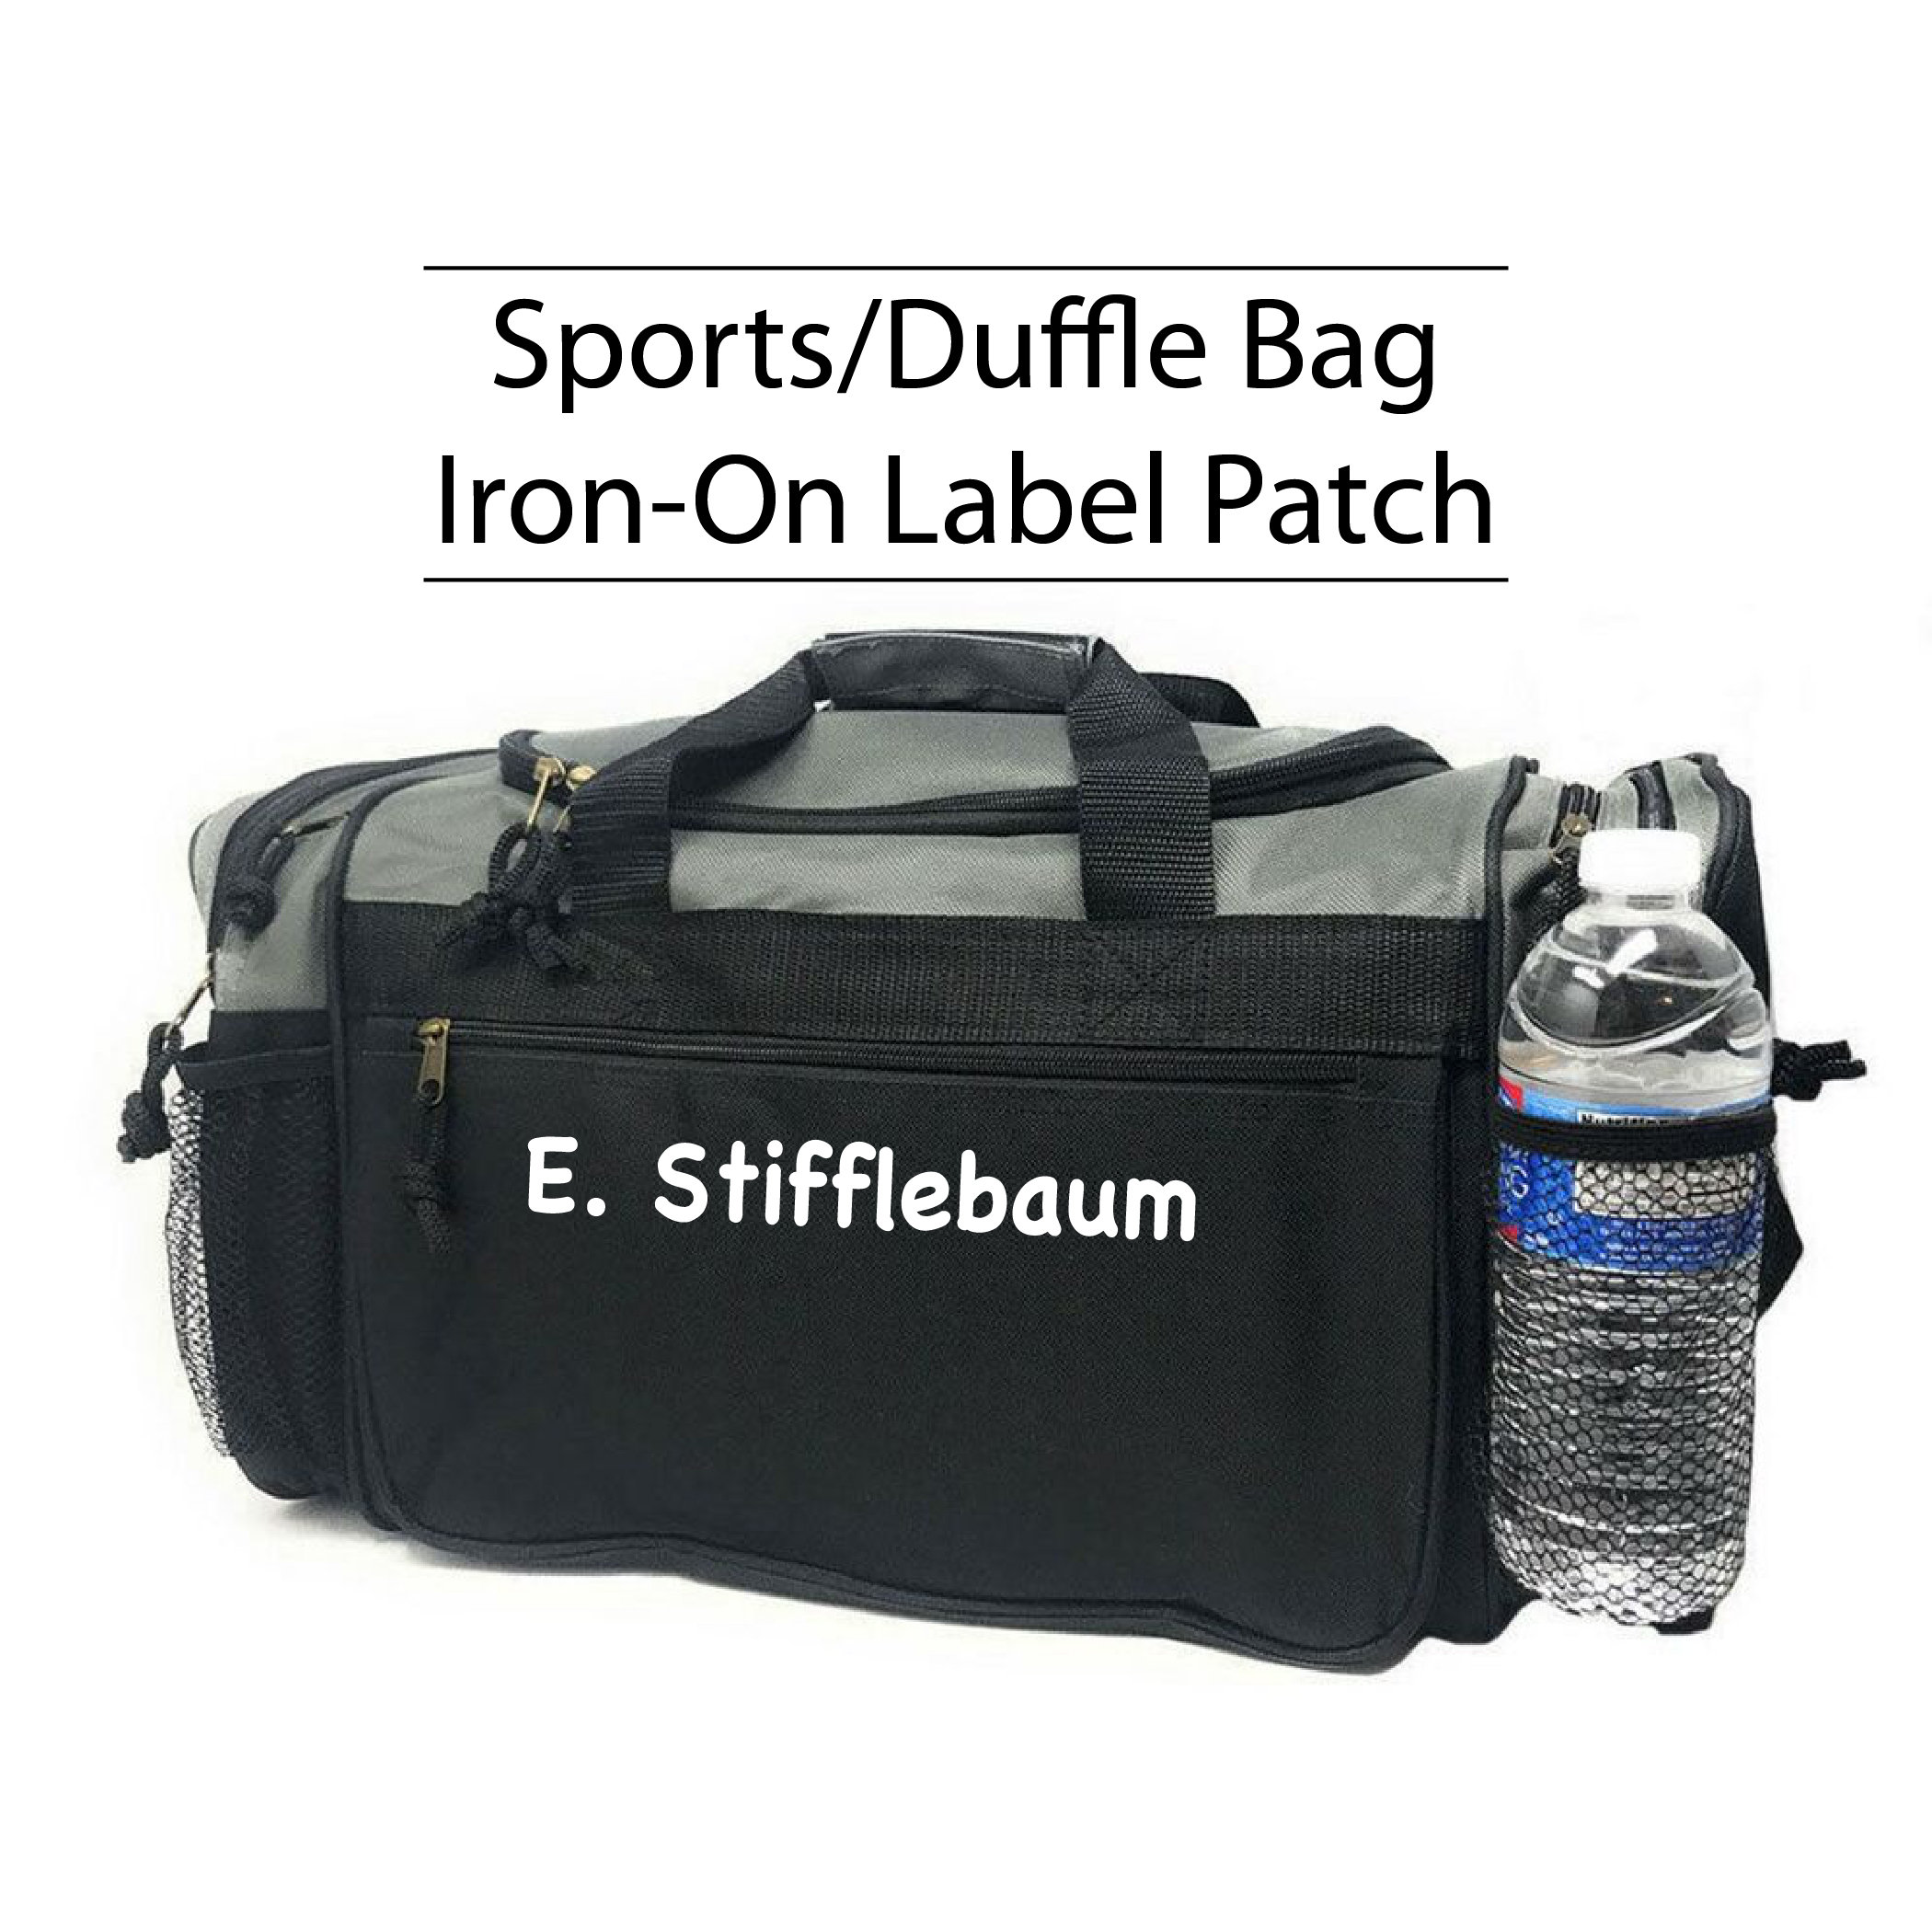 Soccer Player Gym Workout Bag Soccer Team Gifts Embroidered SM-BG1070 Personalized Soccer Player Duffel Gym Bag Soccer Team Bags Tassen & portemonnees Bagage & Reizen Duffelbags 